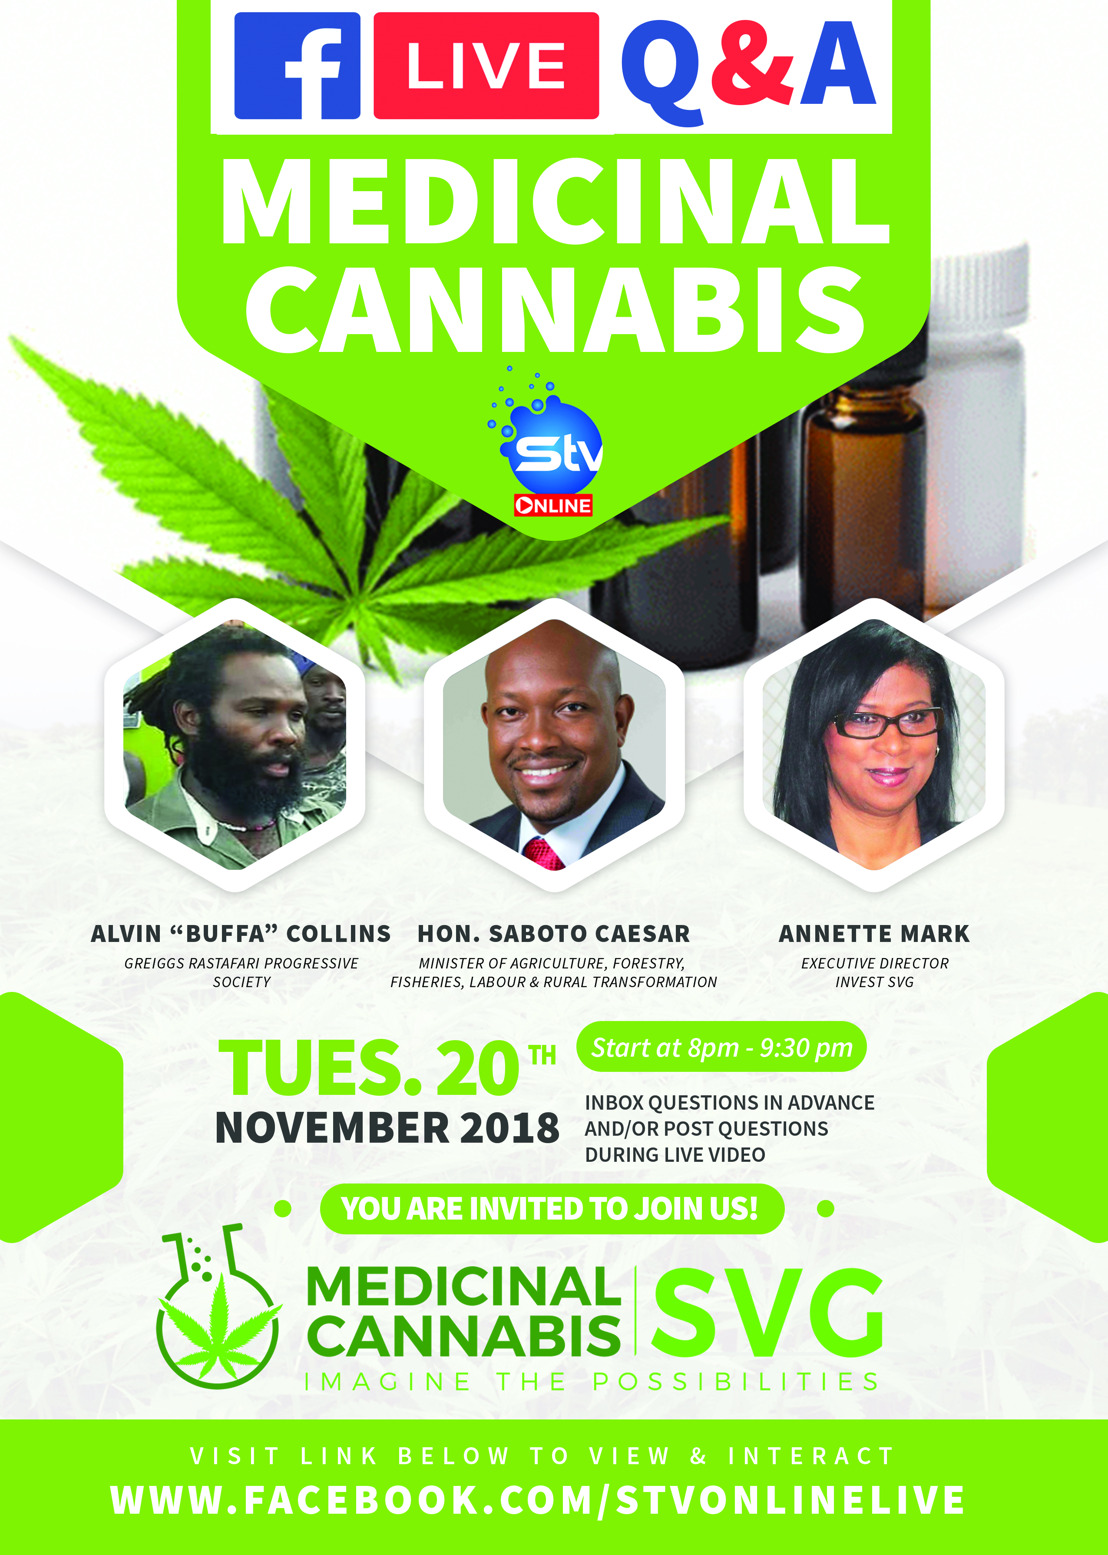 Medicinal Cannabis Investment Opportunities: Saint Vincent and the Grenadines Holds Live Q&A Session